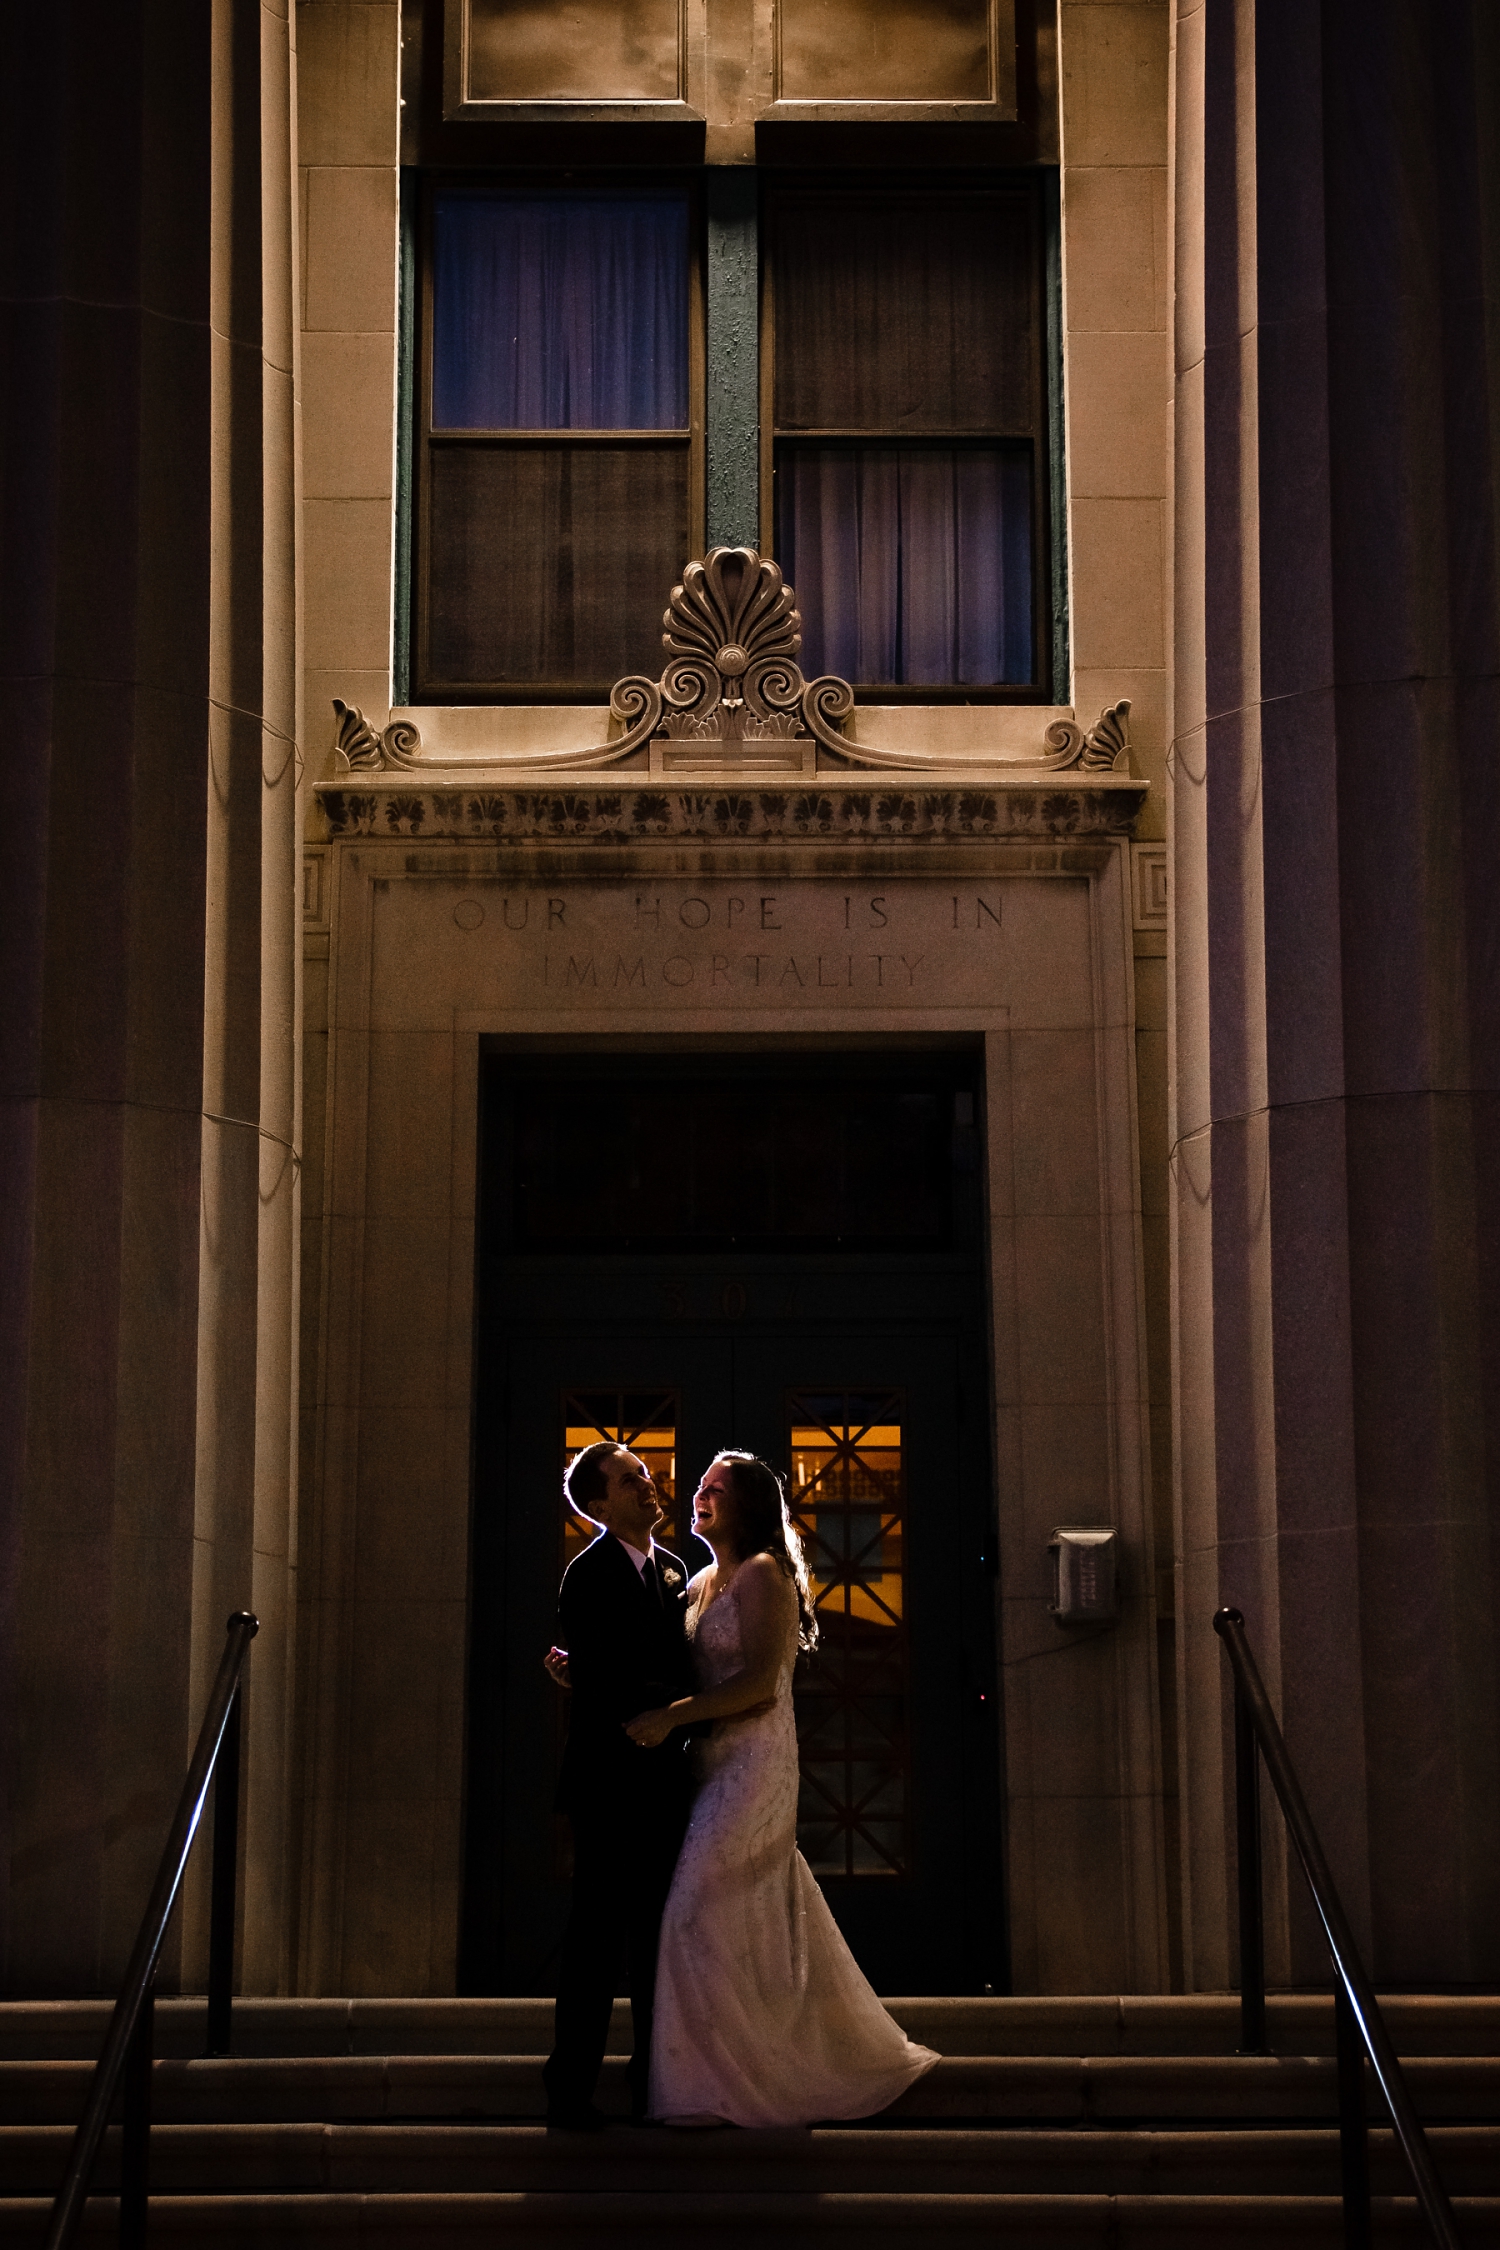 Backlit picture in Madison for a wedding